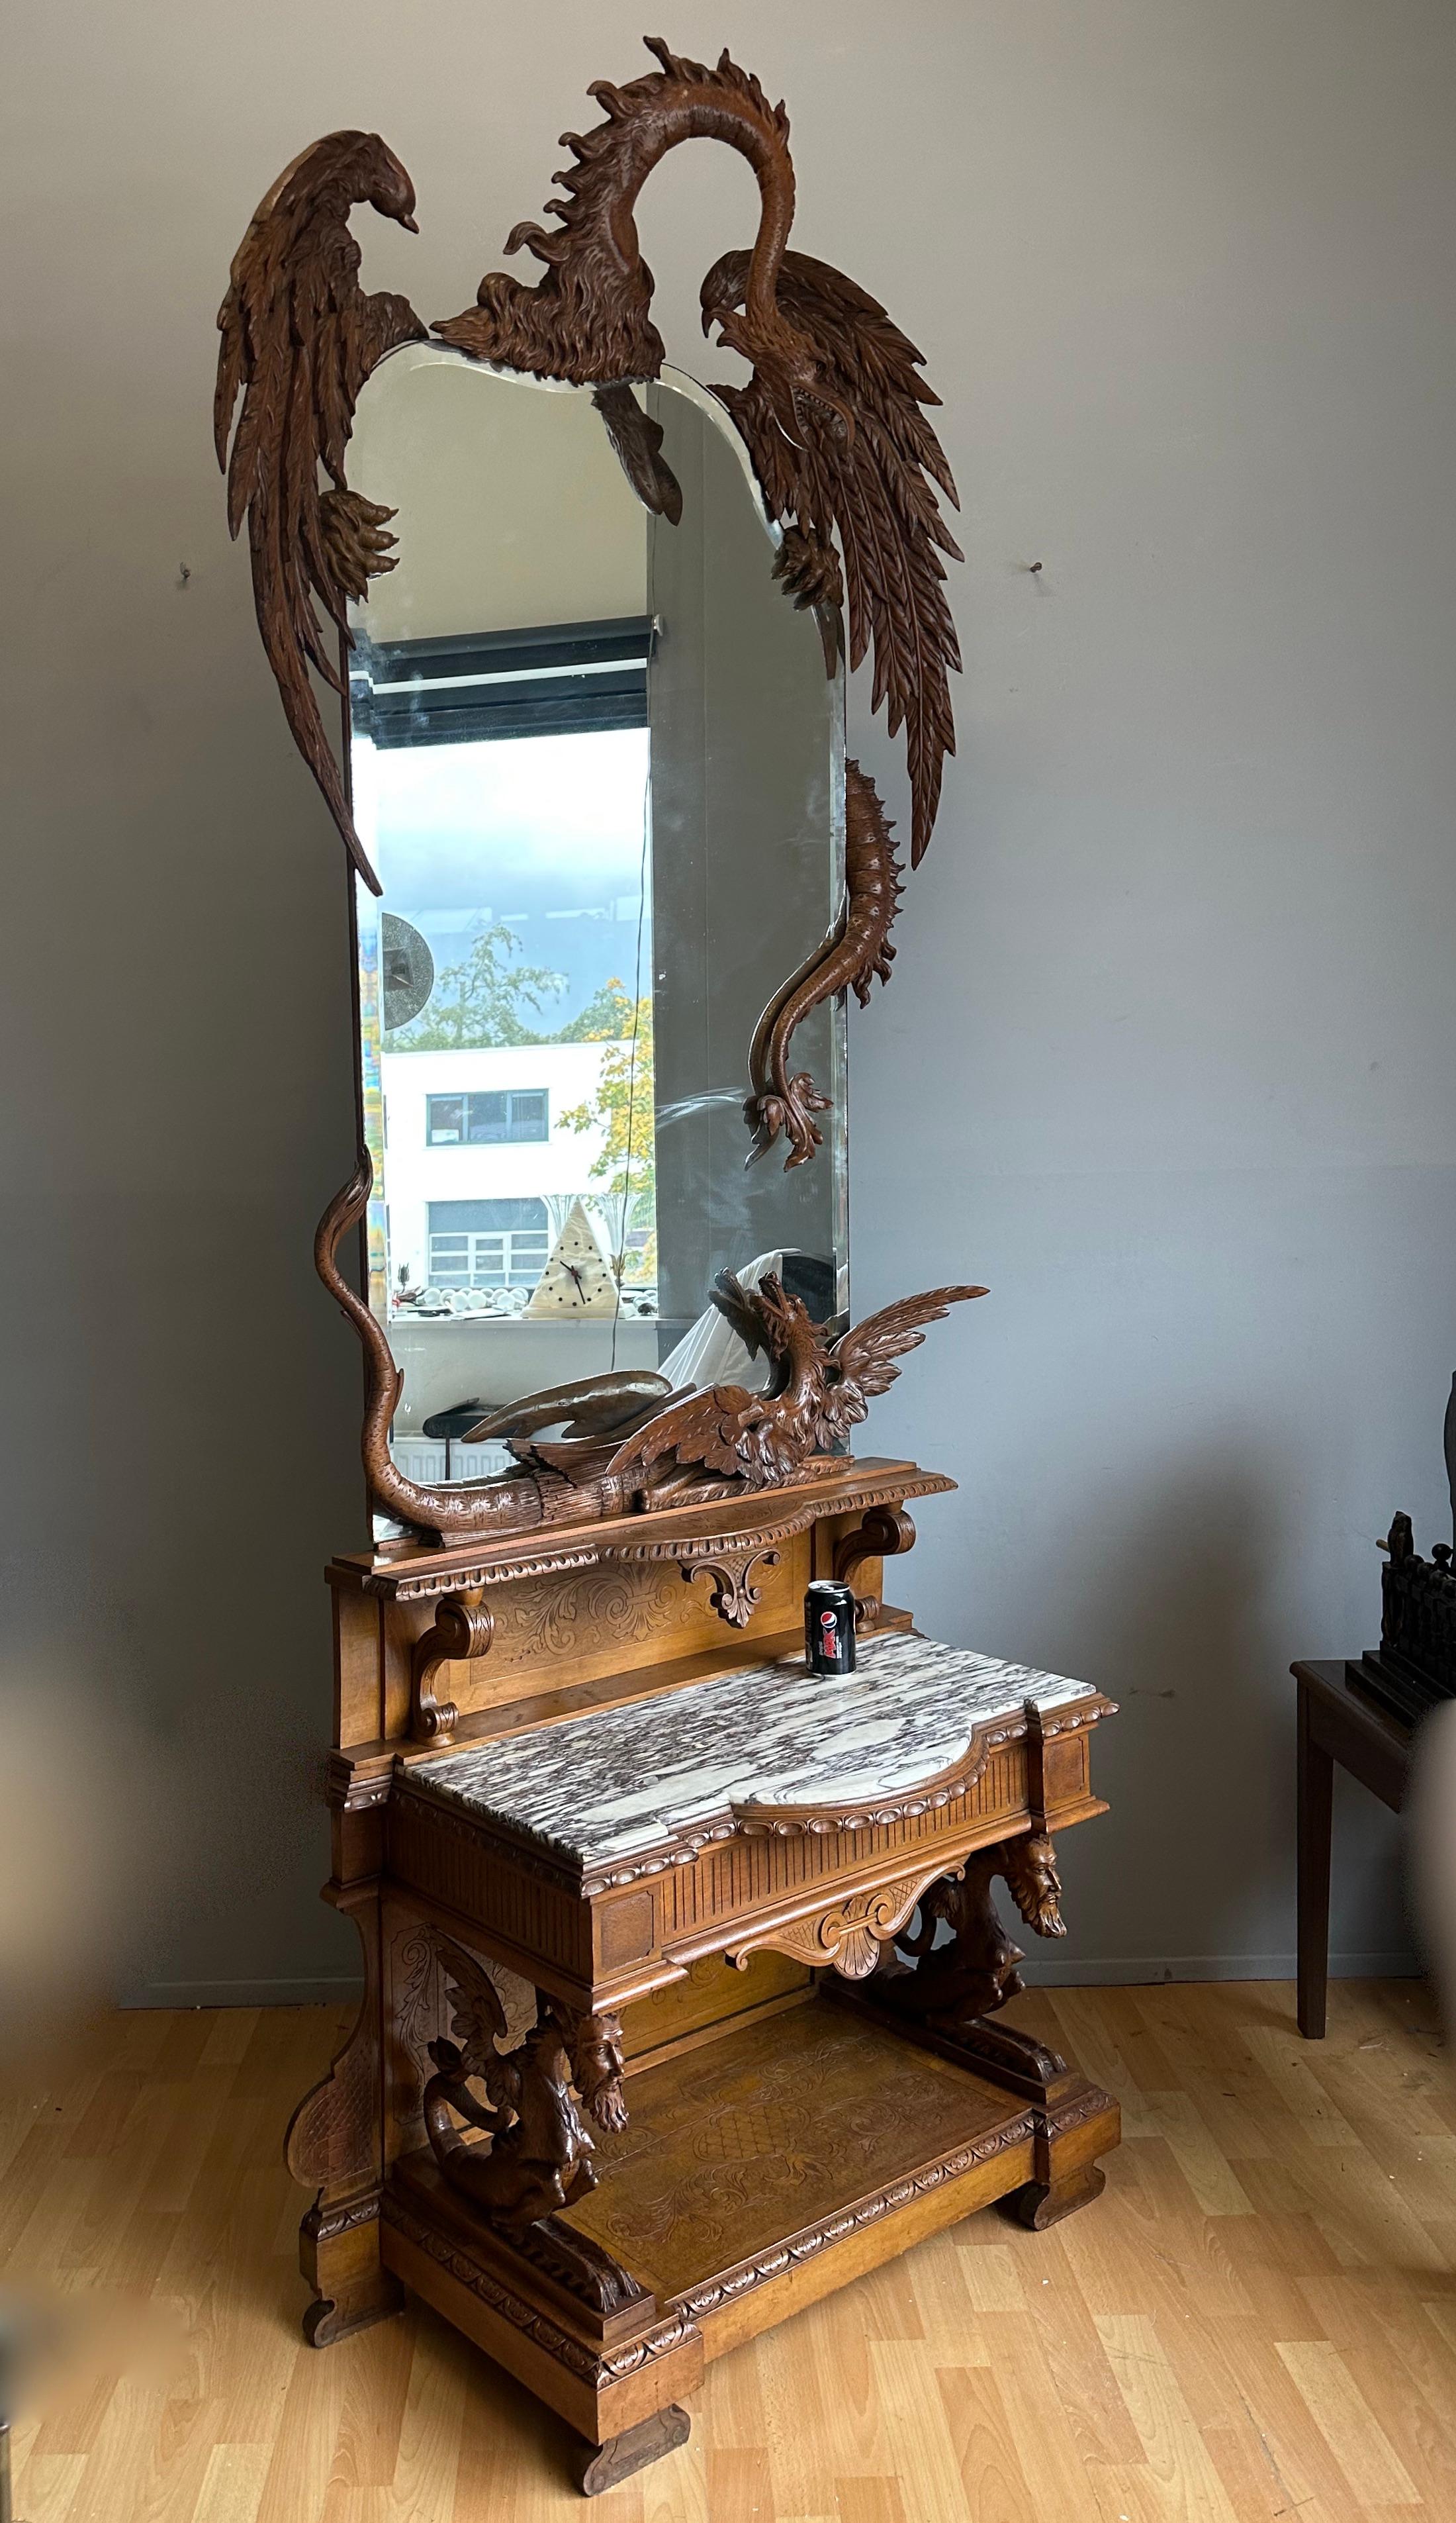 Rare large and extremely sculptural wall table with marble inlay and beveled mirror.

If you are appreciative of rare and sculptural antiques then this large mirror /side table could be exactly what you are looking for. The quality and the patina of